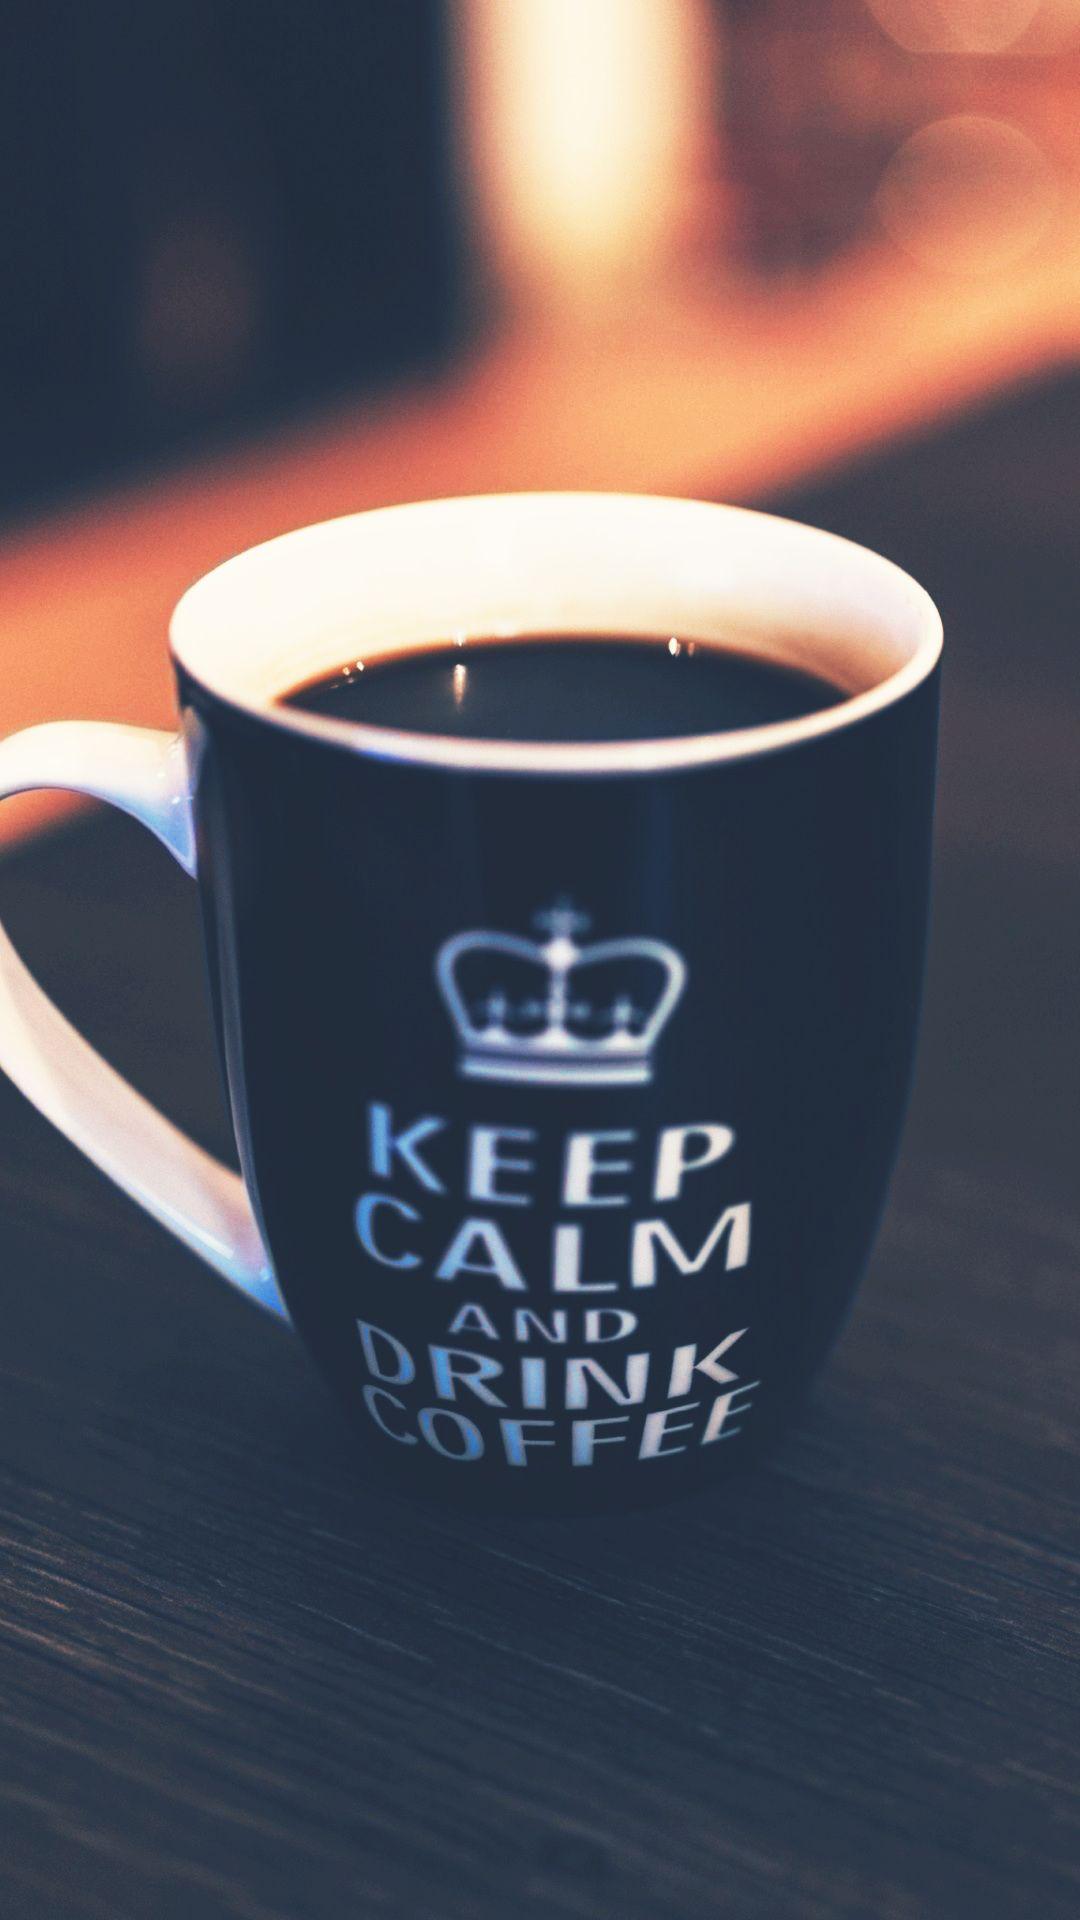 Keep Calm Drink Coffee Cup Android Wallpaper free download